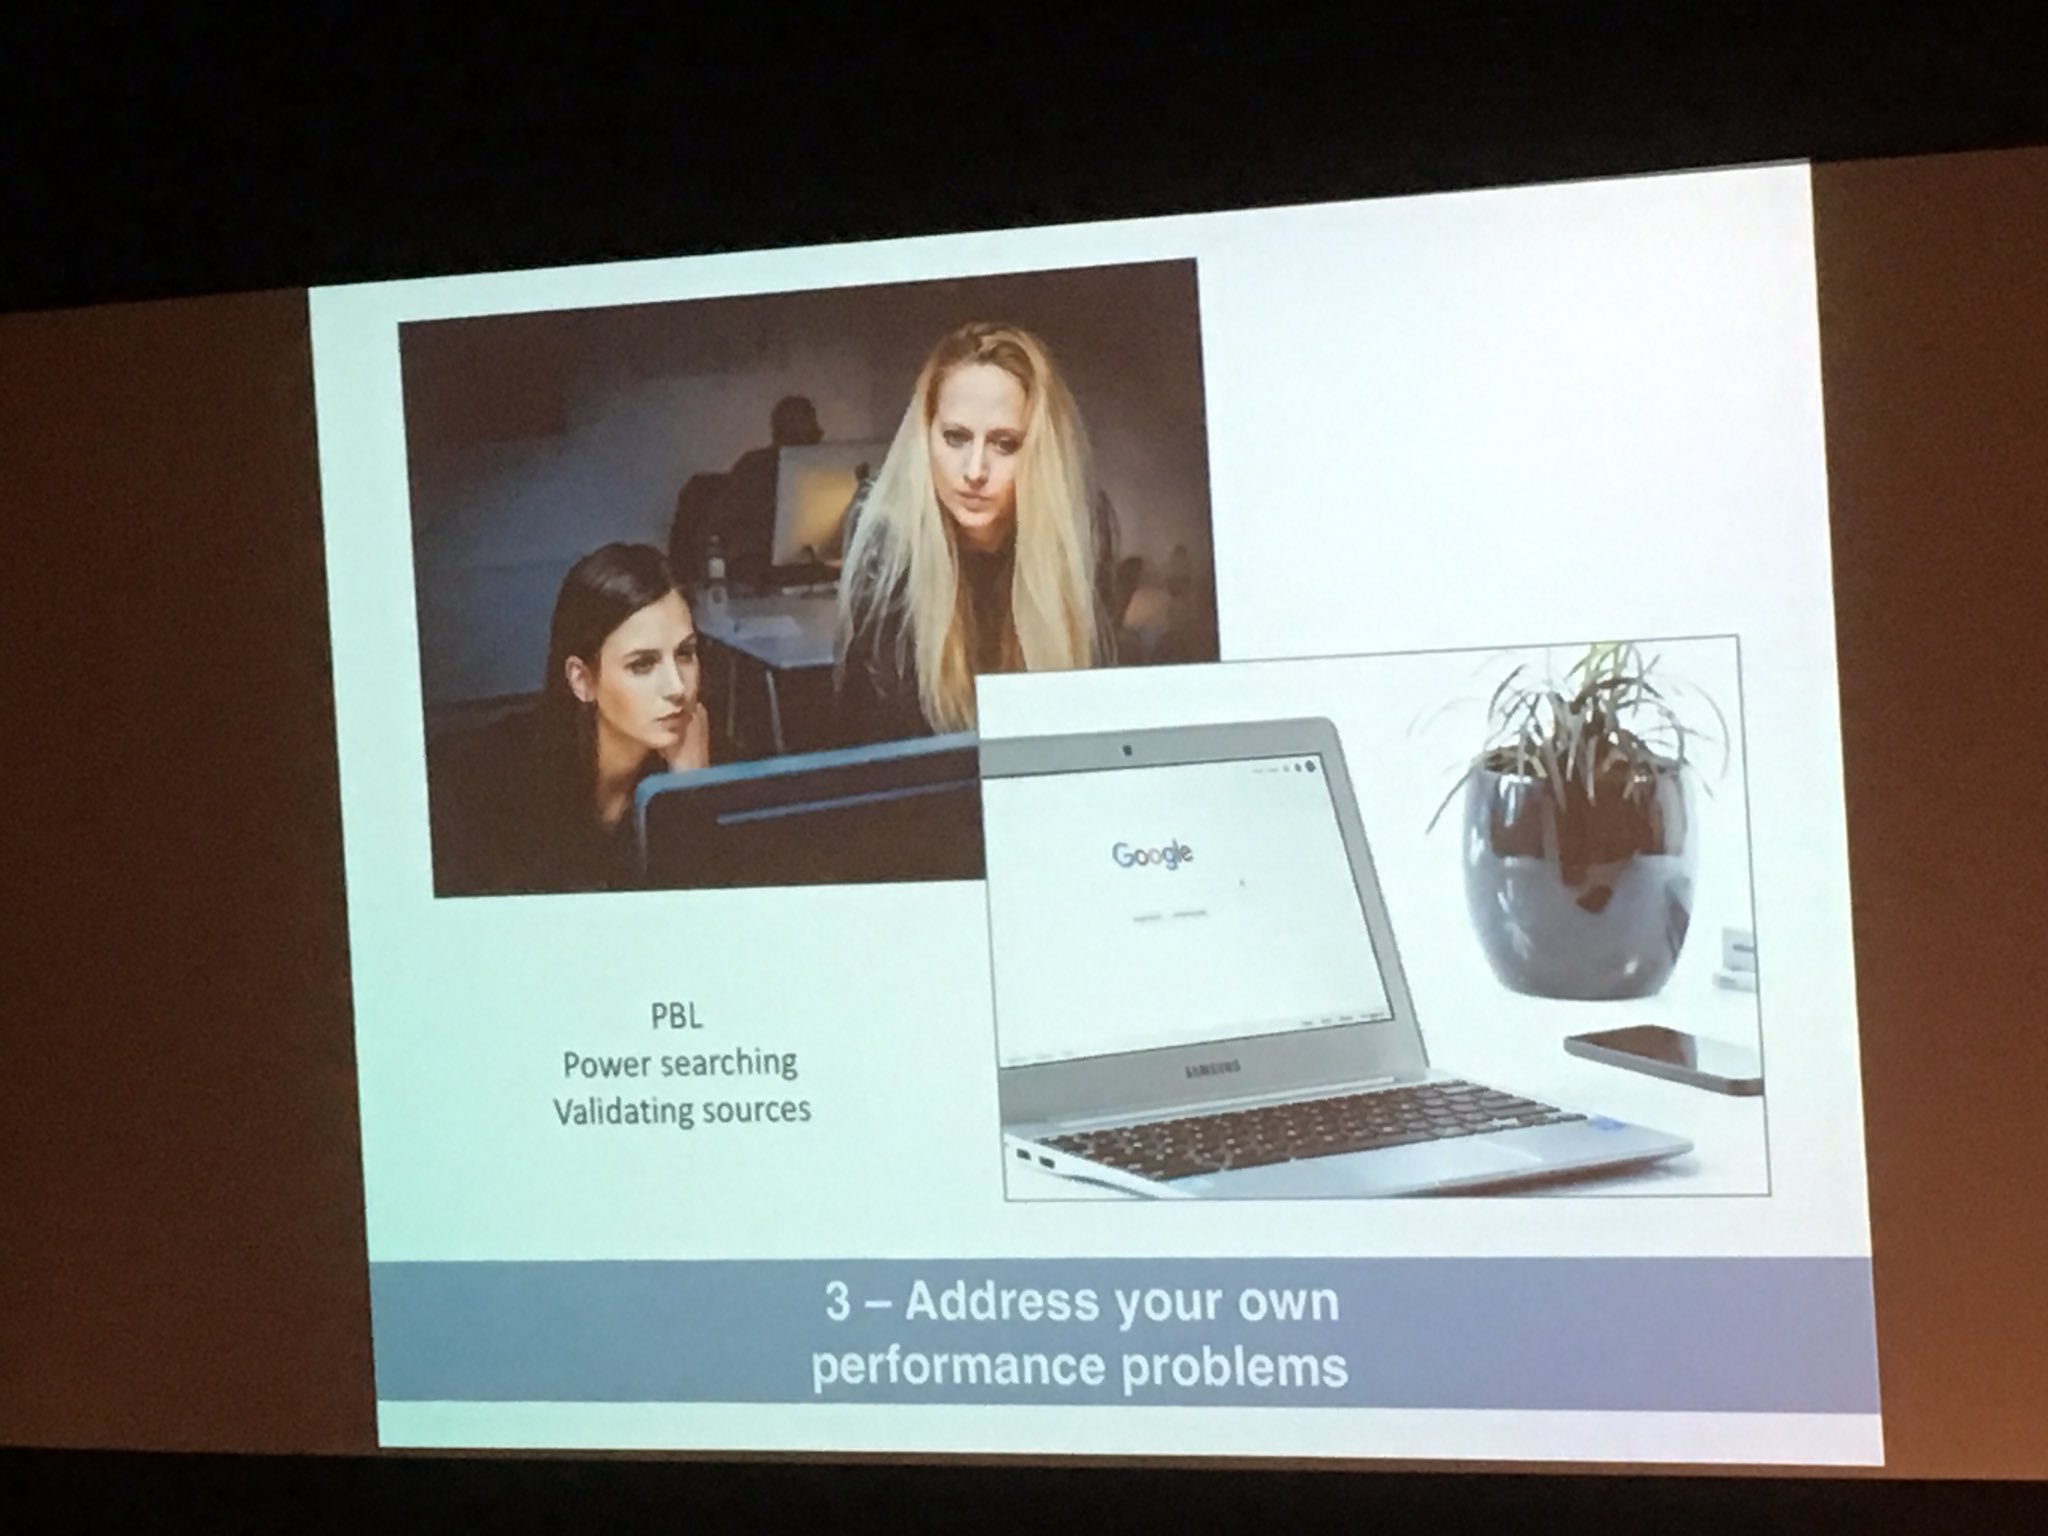 Guideline 3 is self reliance to address your own performance problems. Need to develop solving and searching skills. @C4LPT #SUSALT17 https://t.co/iWx00K2RId